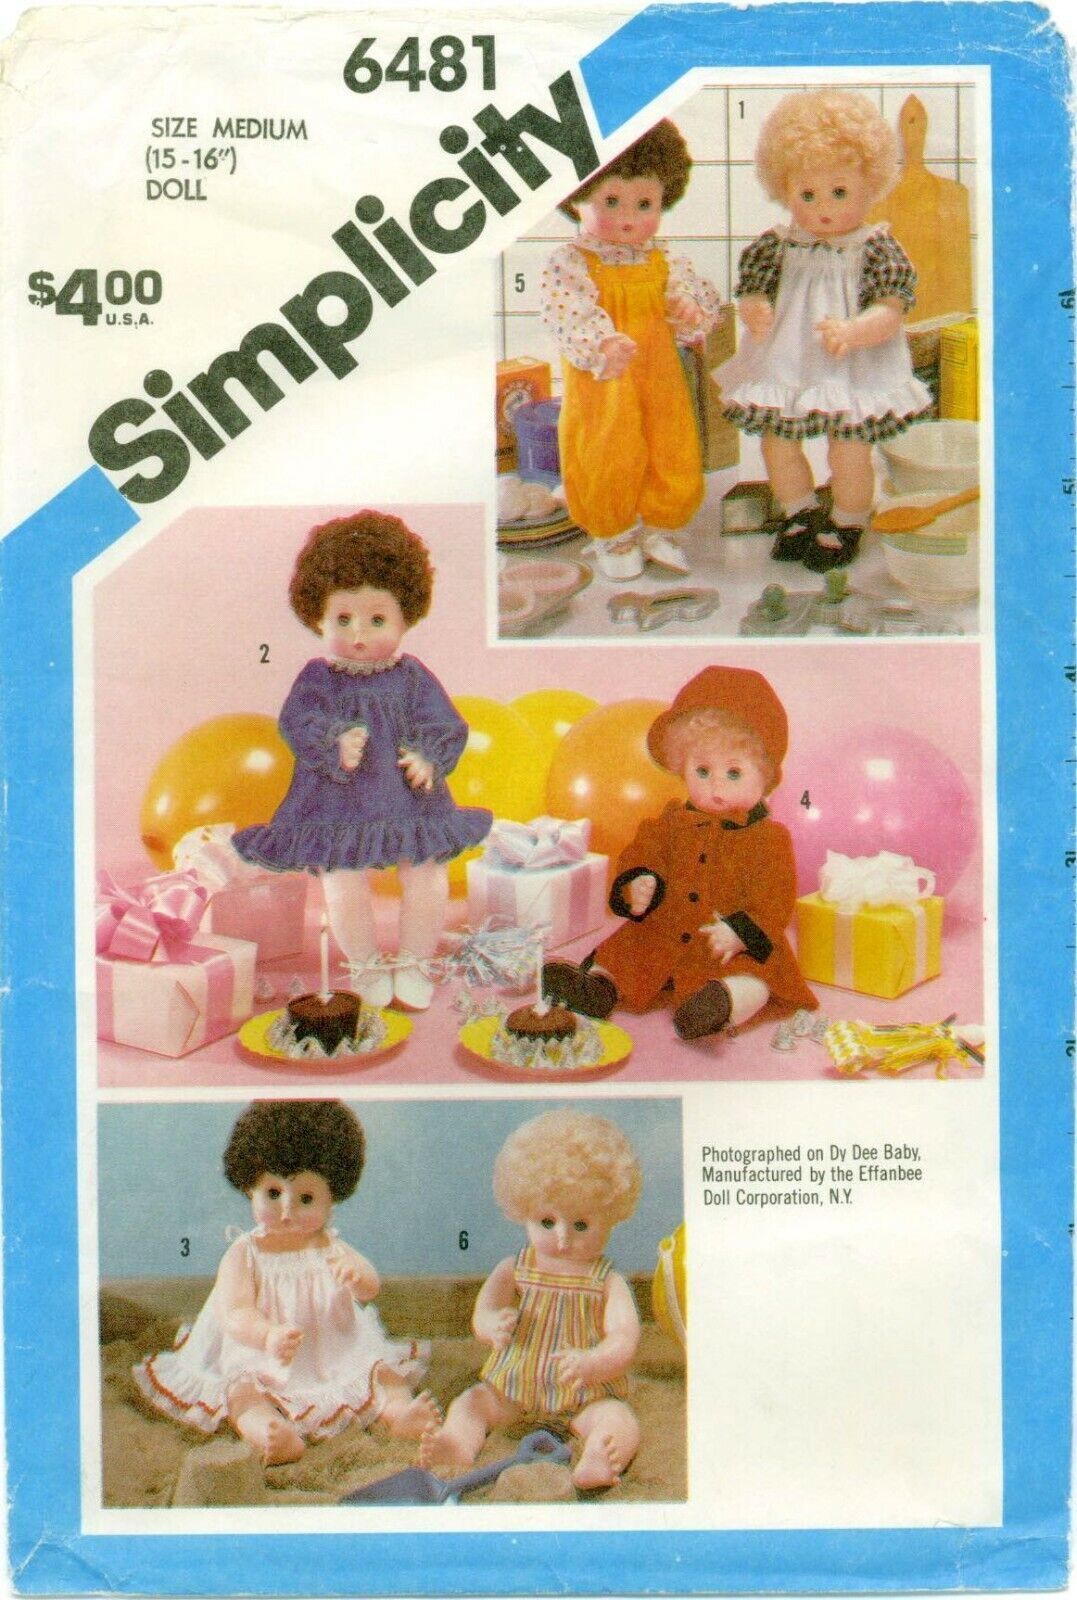 Primary image for Simplicity 6481 Doll Clothes Wardrobe Baby Girl 15-16" pattern UNCUT FF 1984 VTG